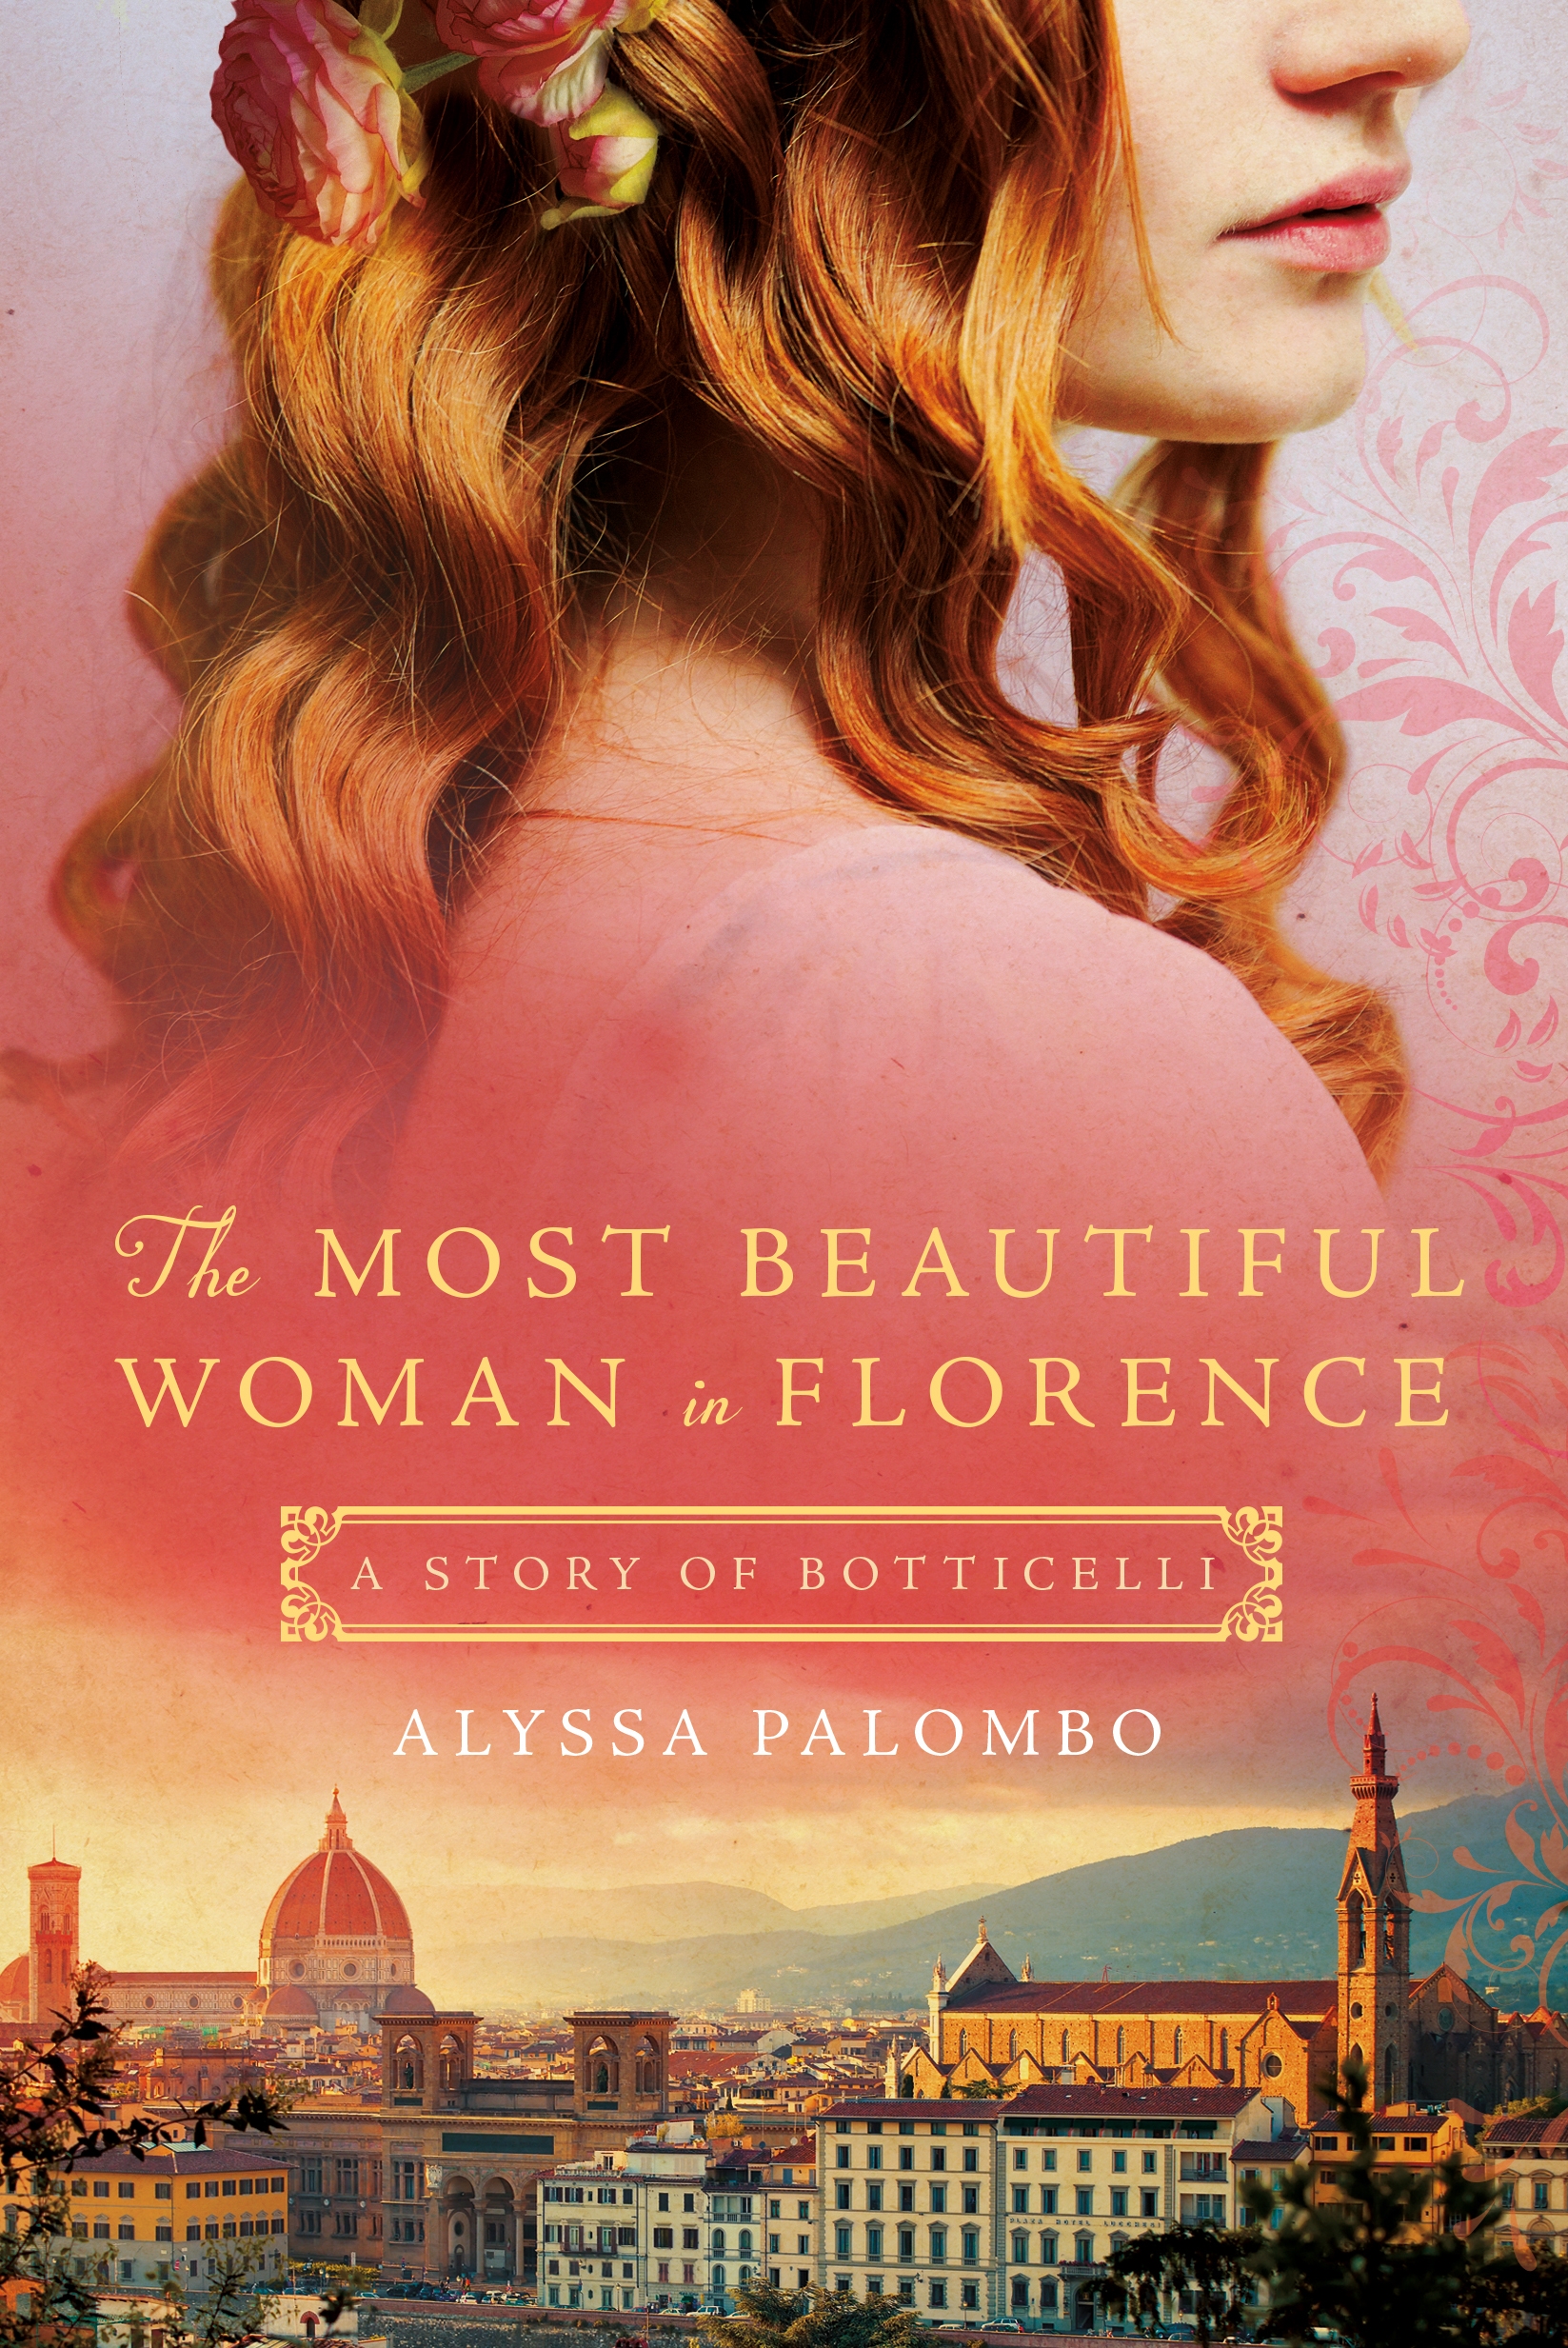 The Most Beautiful Woman in Florence: A Story of Botticelli